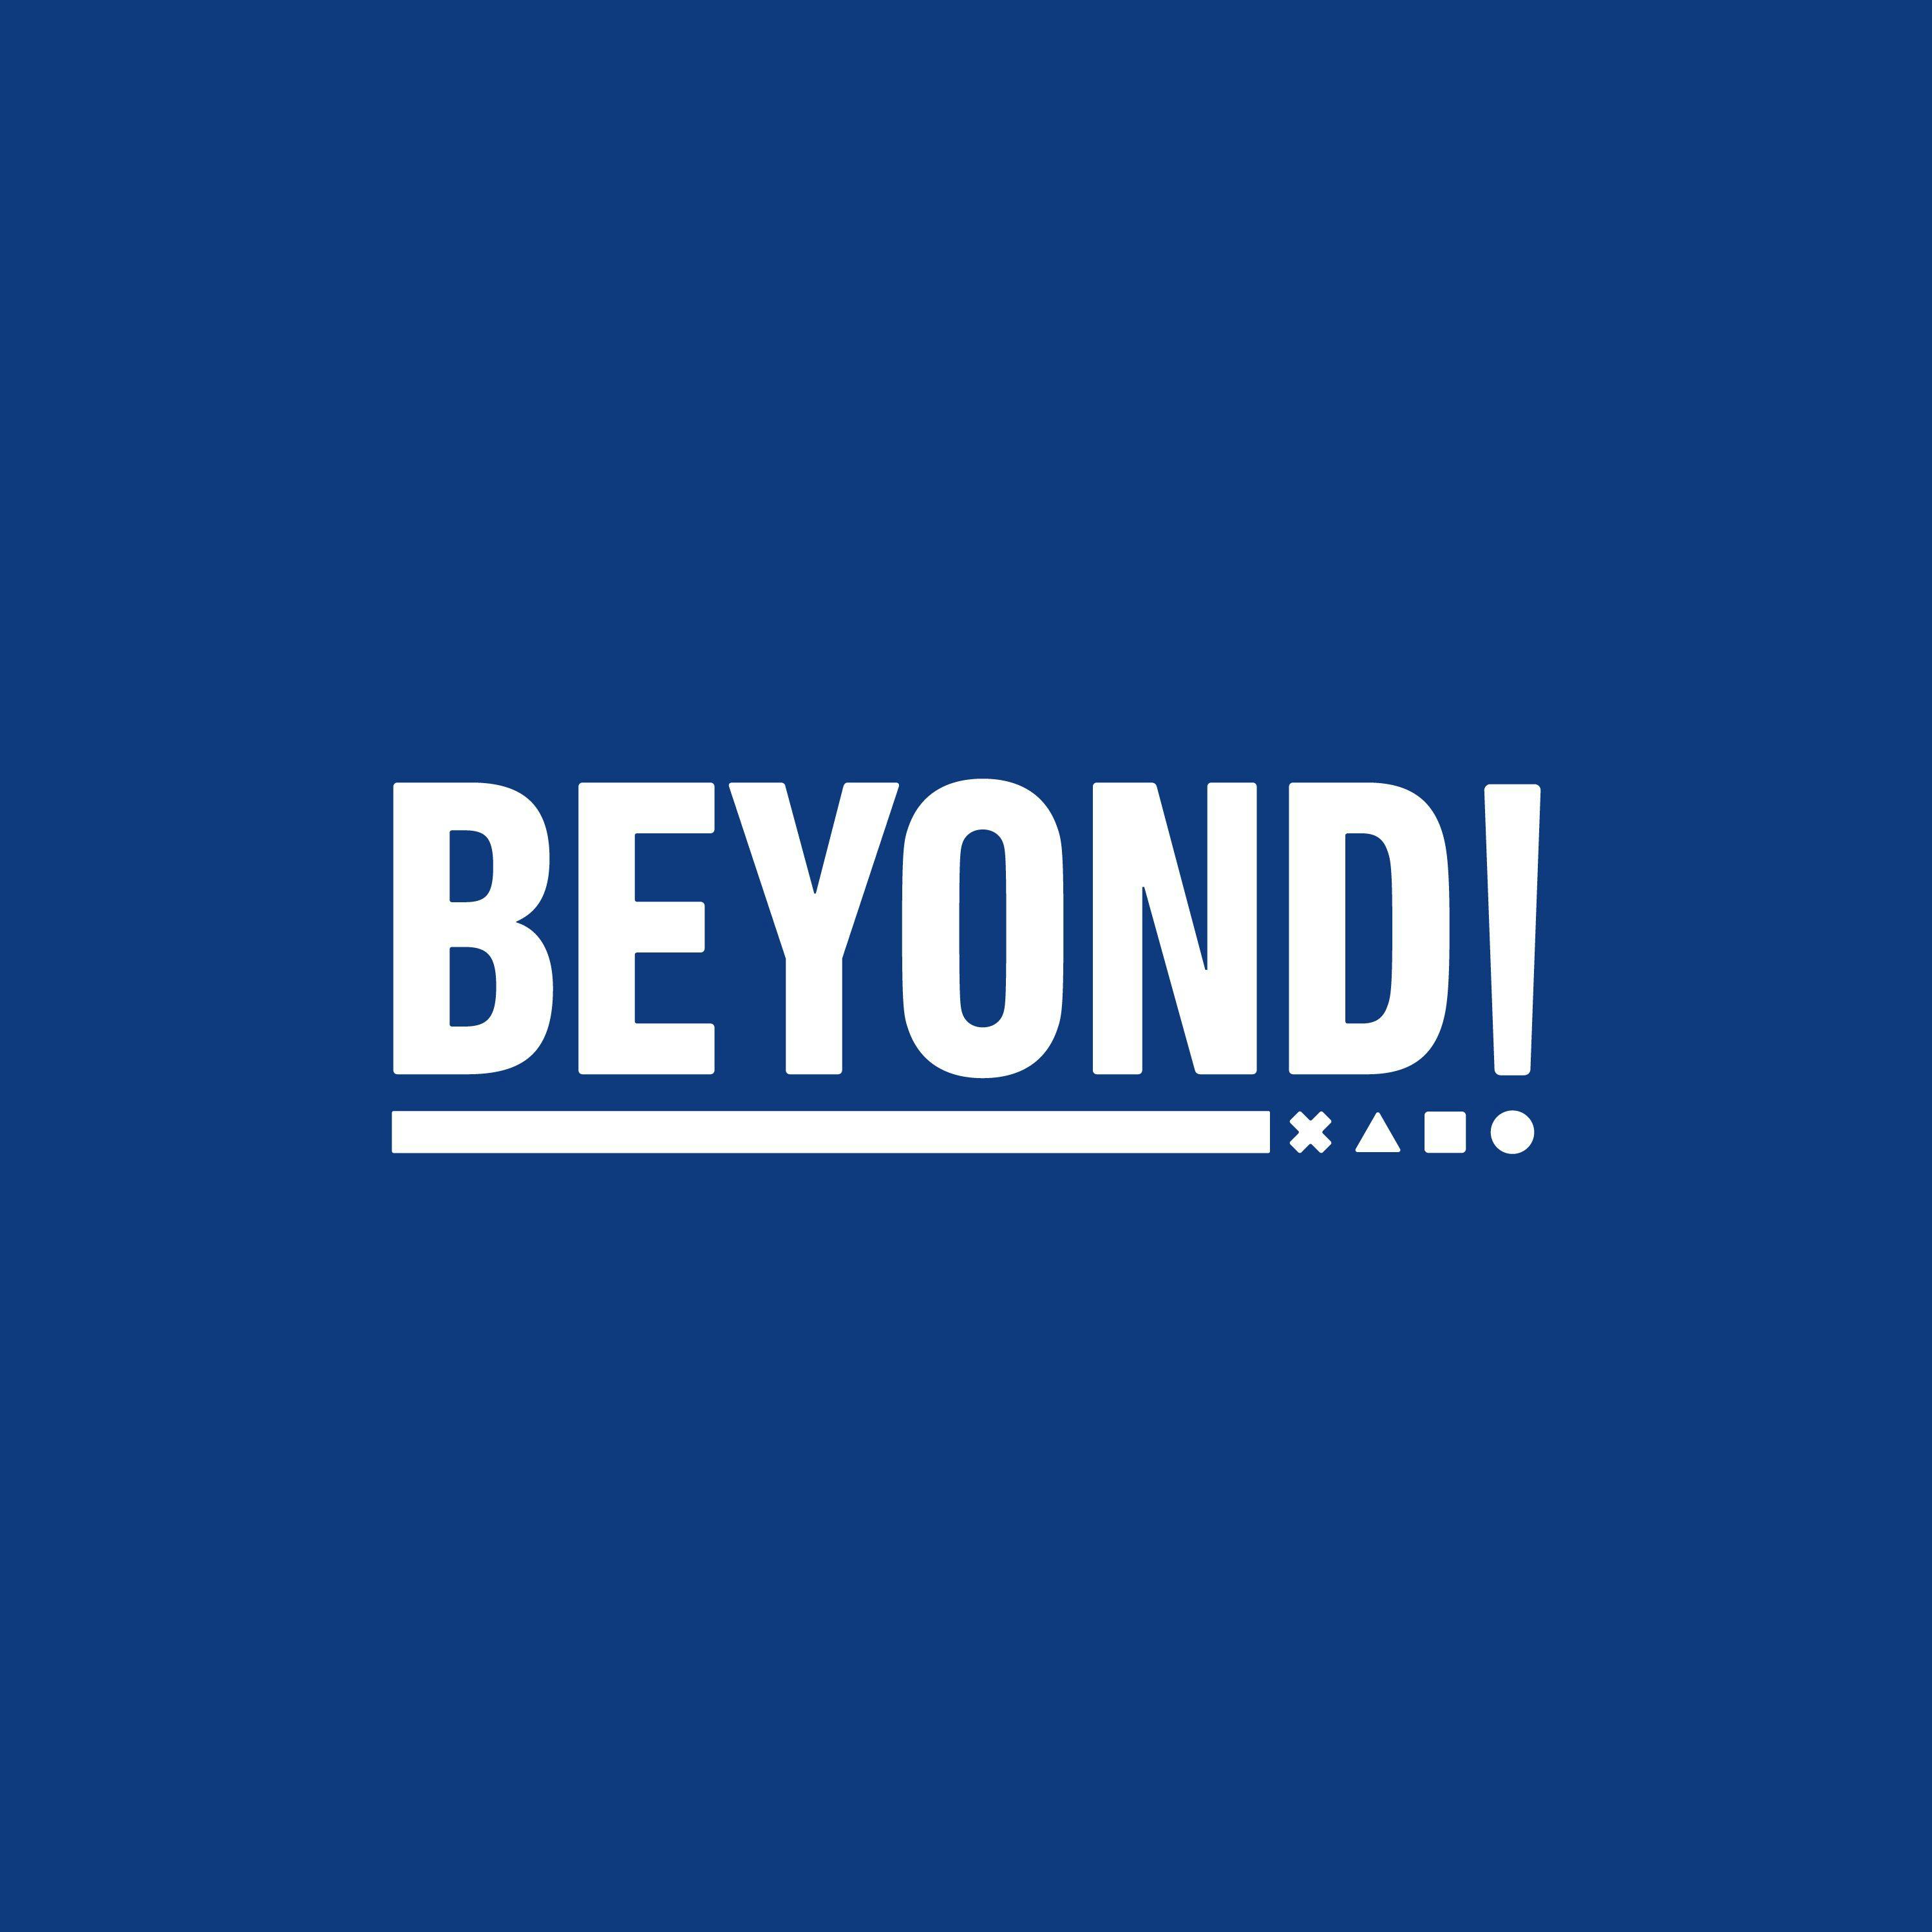 PlayStation Skipped E3 2021: Was That the Right Move? - Beyond Episode 705